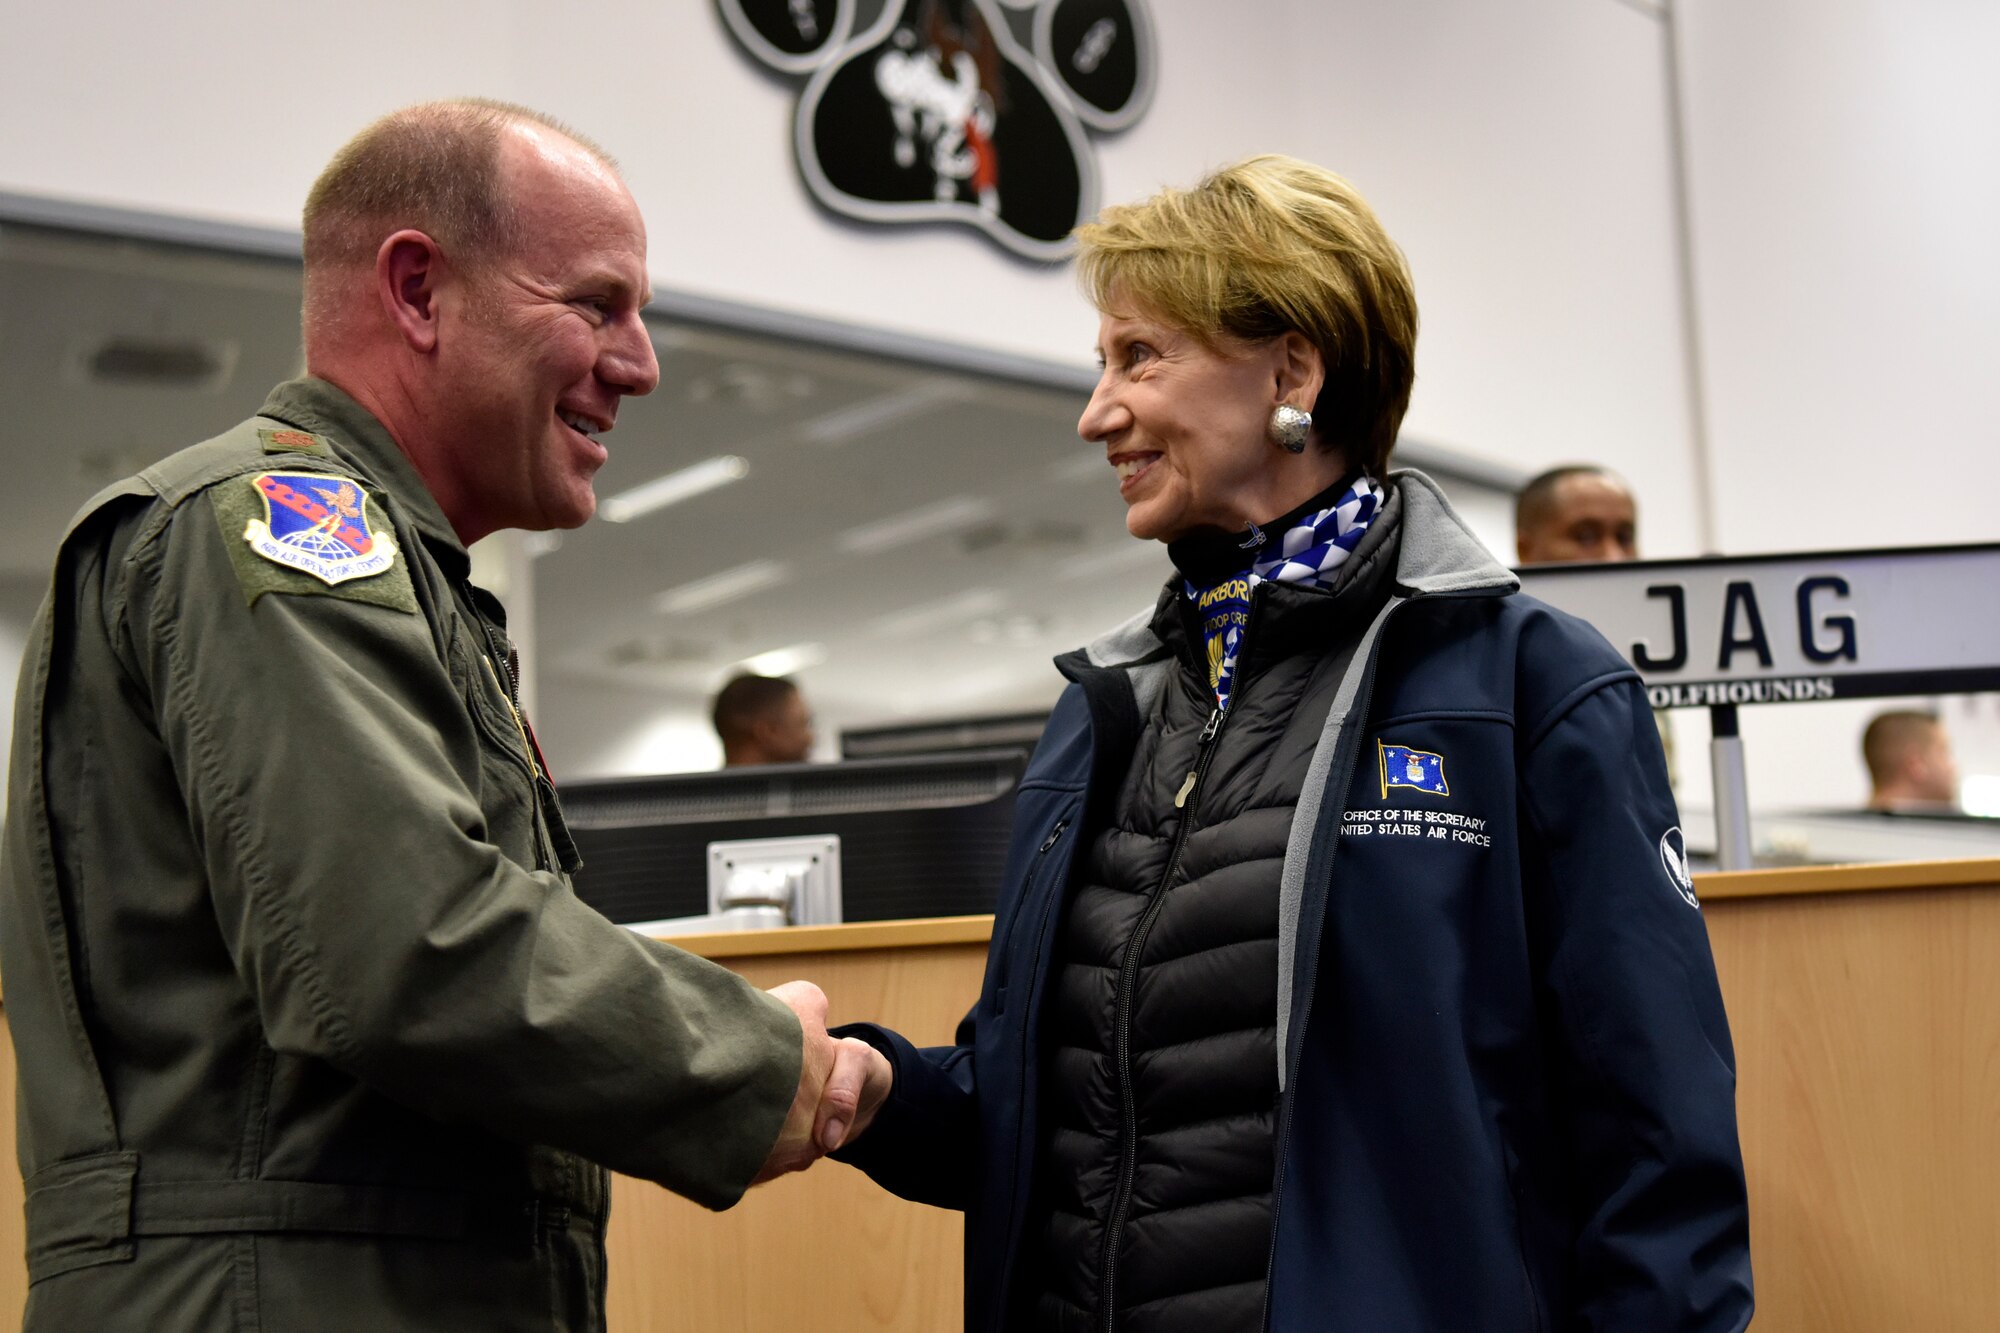 U.S. Air Force Maj. Kevin Edwards, U.S. Air Forces in Europe and Air Forces Africa joint interface control officer, receives a coin from Secretary of the Air Force Barbara M. Barrett during a tour of the 603rd Air and Space Operations Center at Ramstein Air Base, Germany, Nov. 22, 2019.